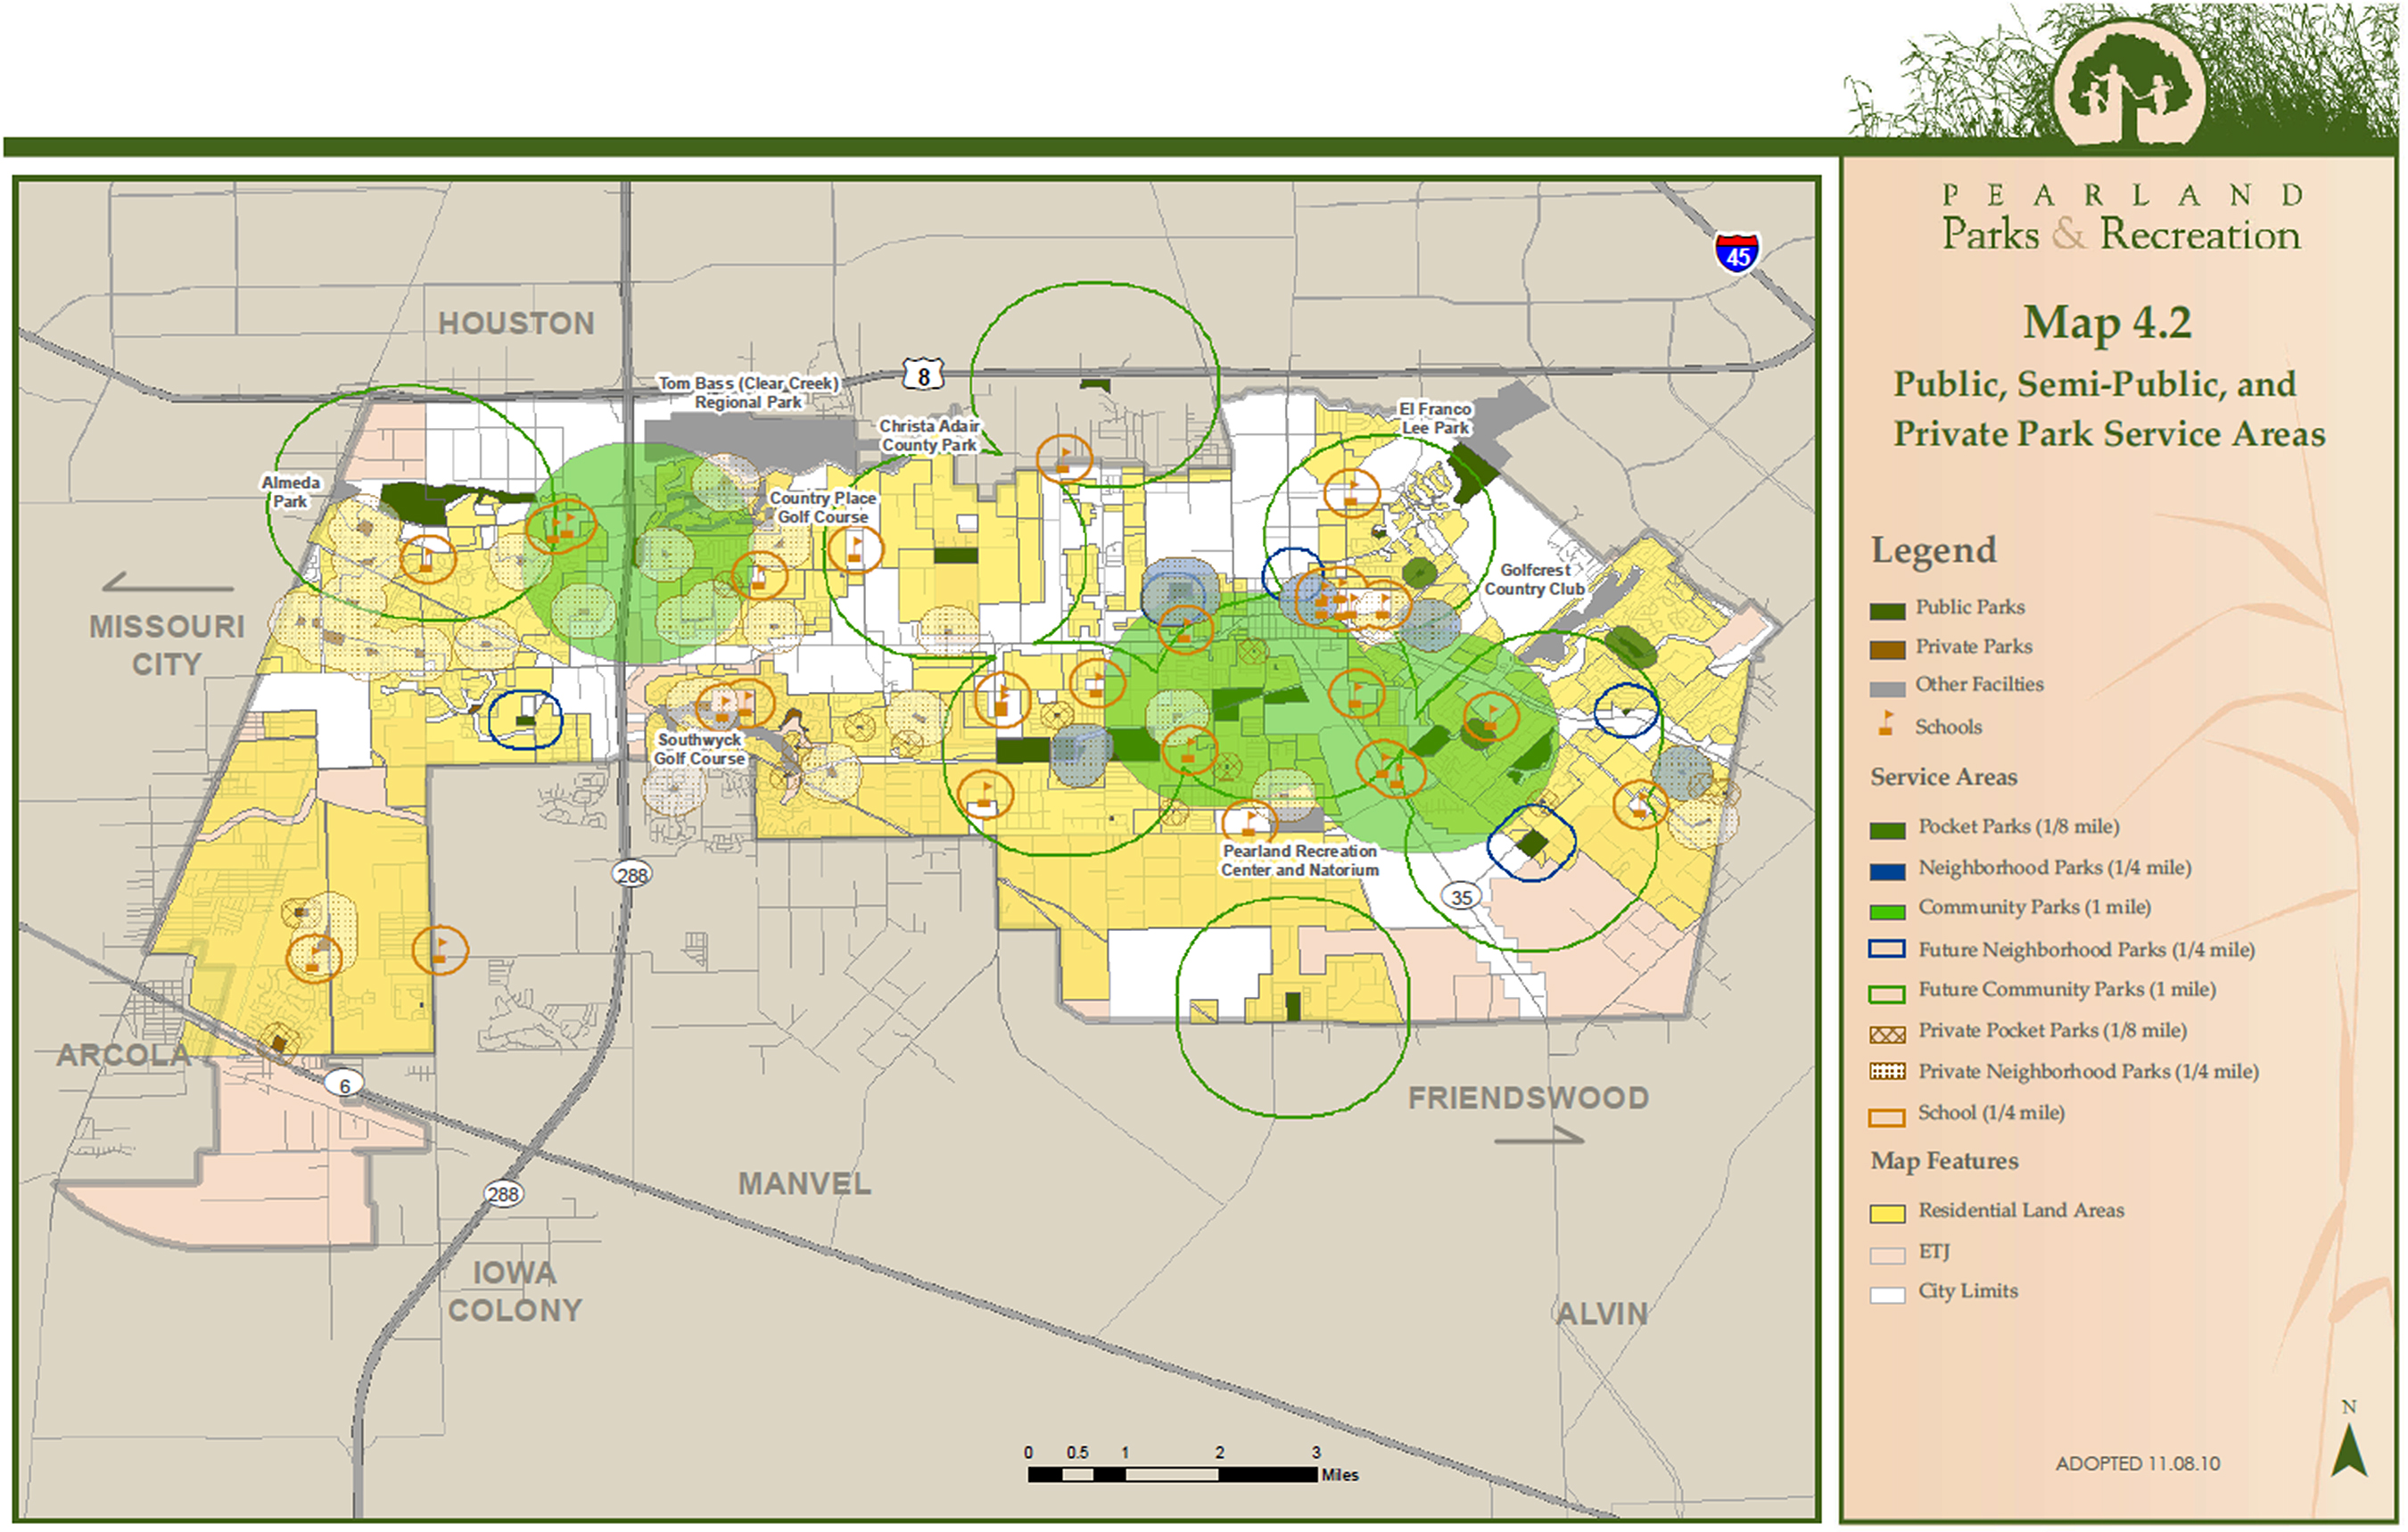 Parks and Recreation Master Plan Pearland, Texas